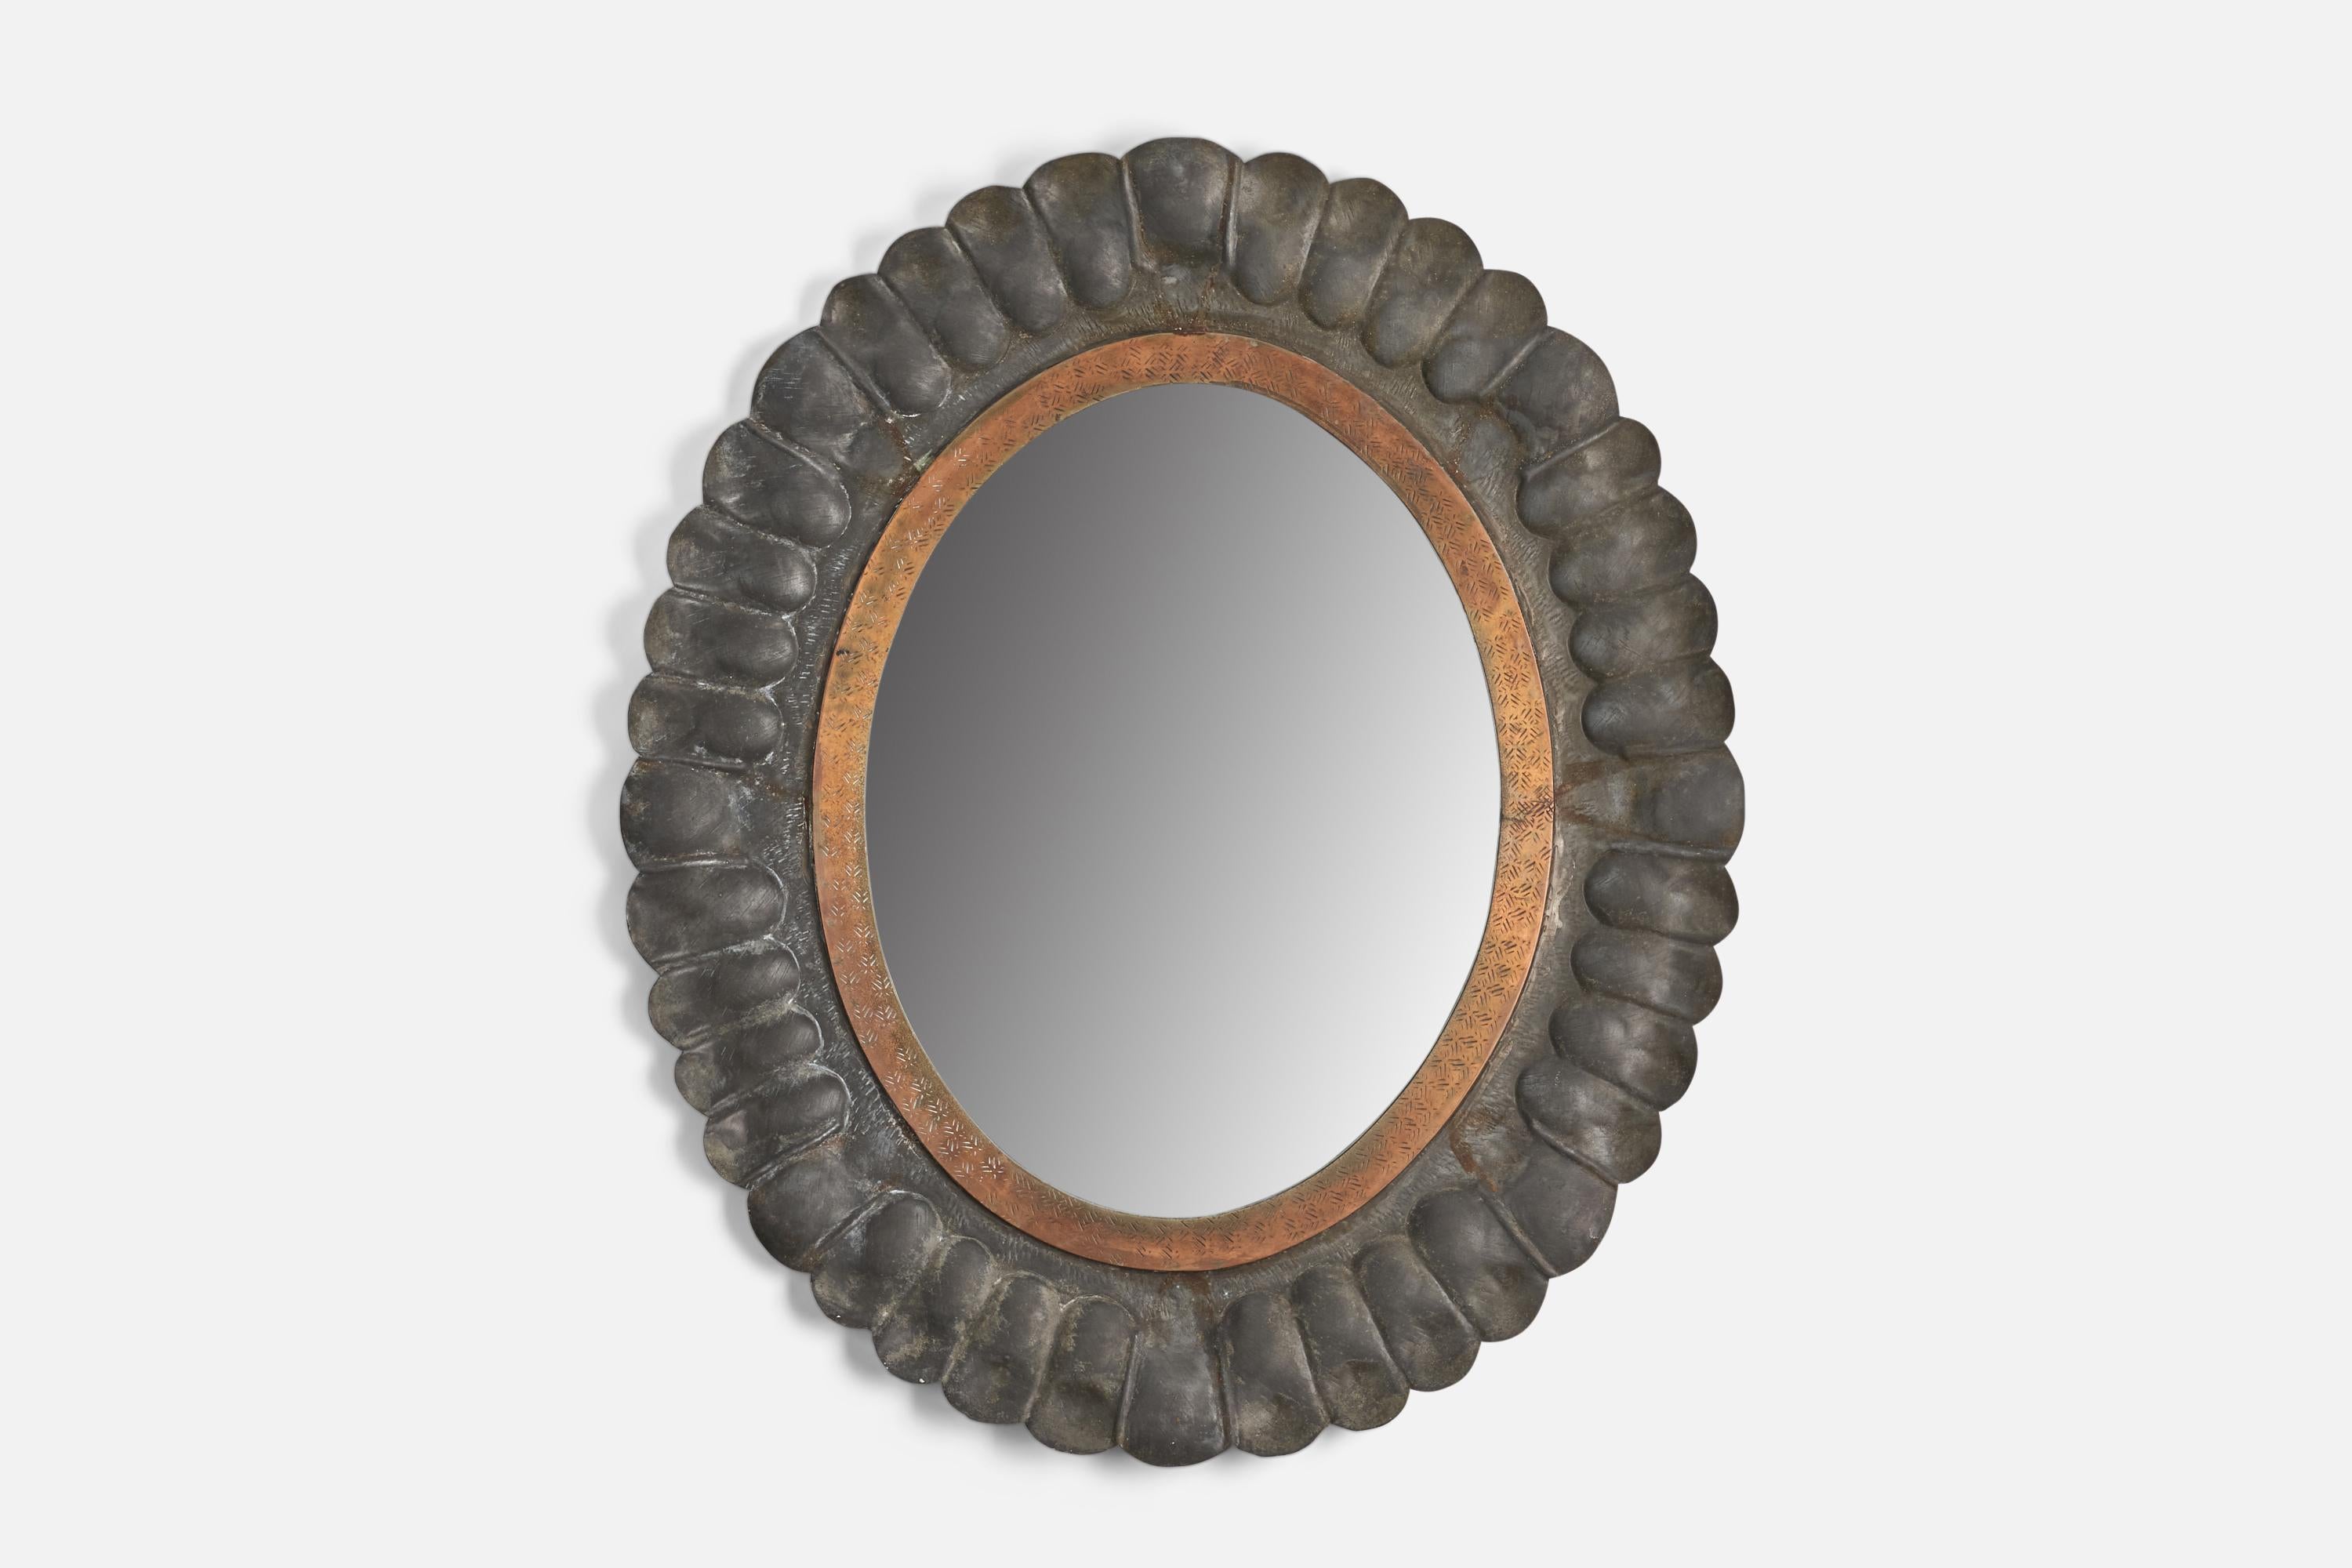 A pewter and copper wall mirror designed and produced by an Italian Designer, Italy, 1930s.